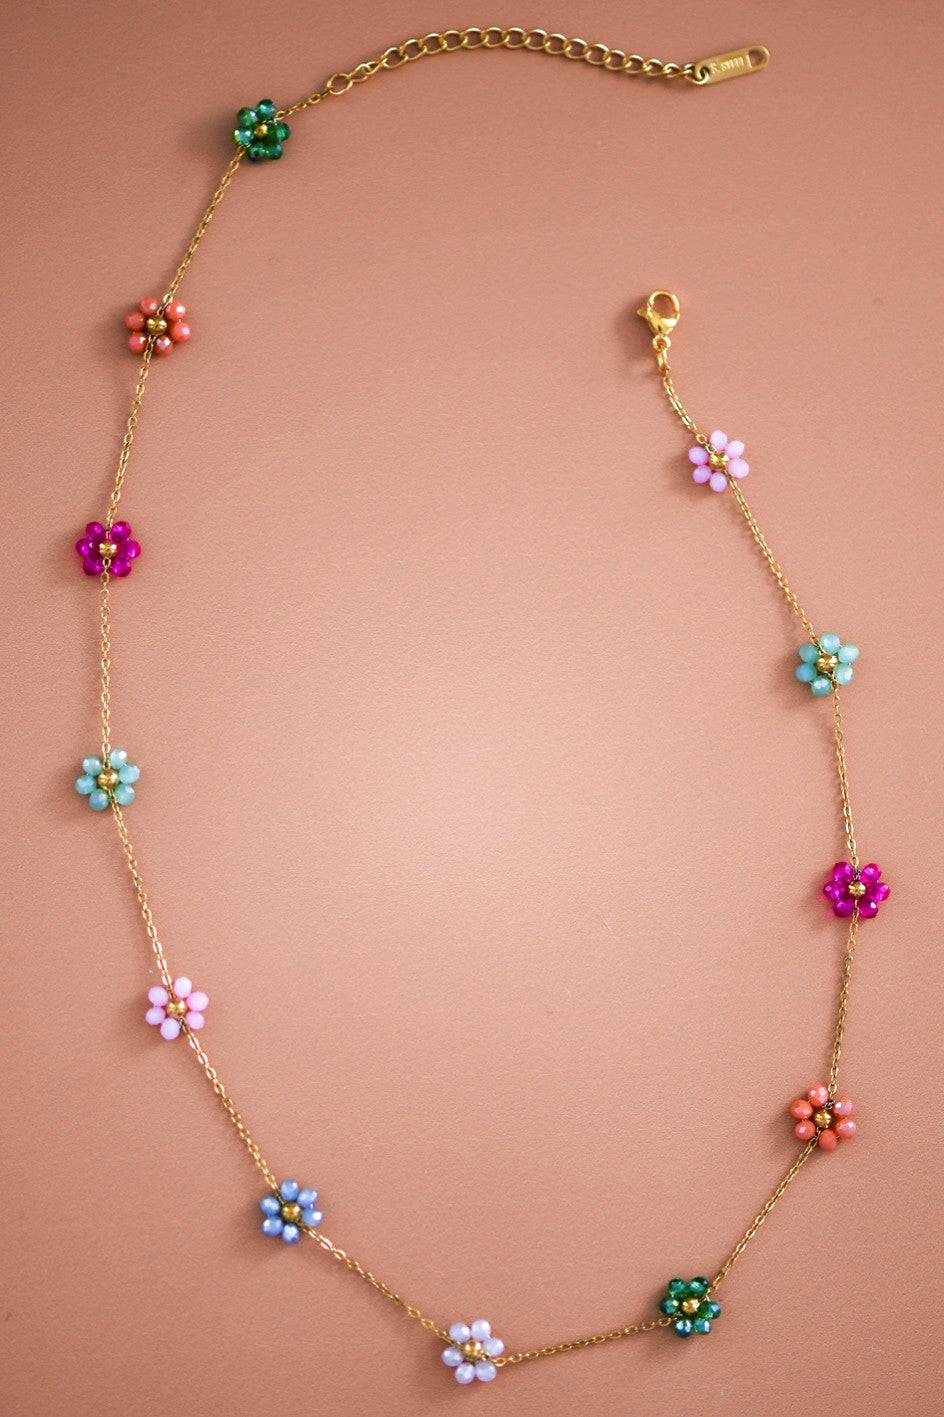 Beaded Flower Necklace - Out of the Blue